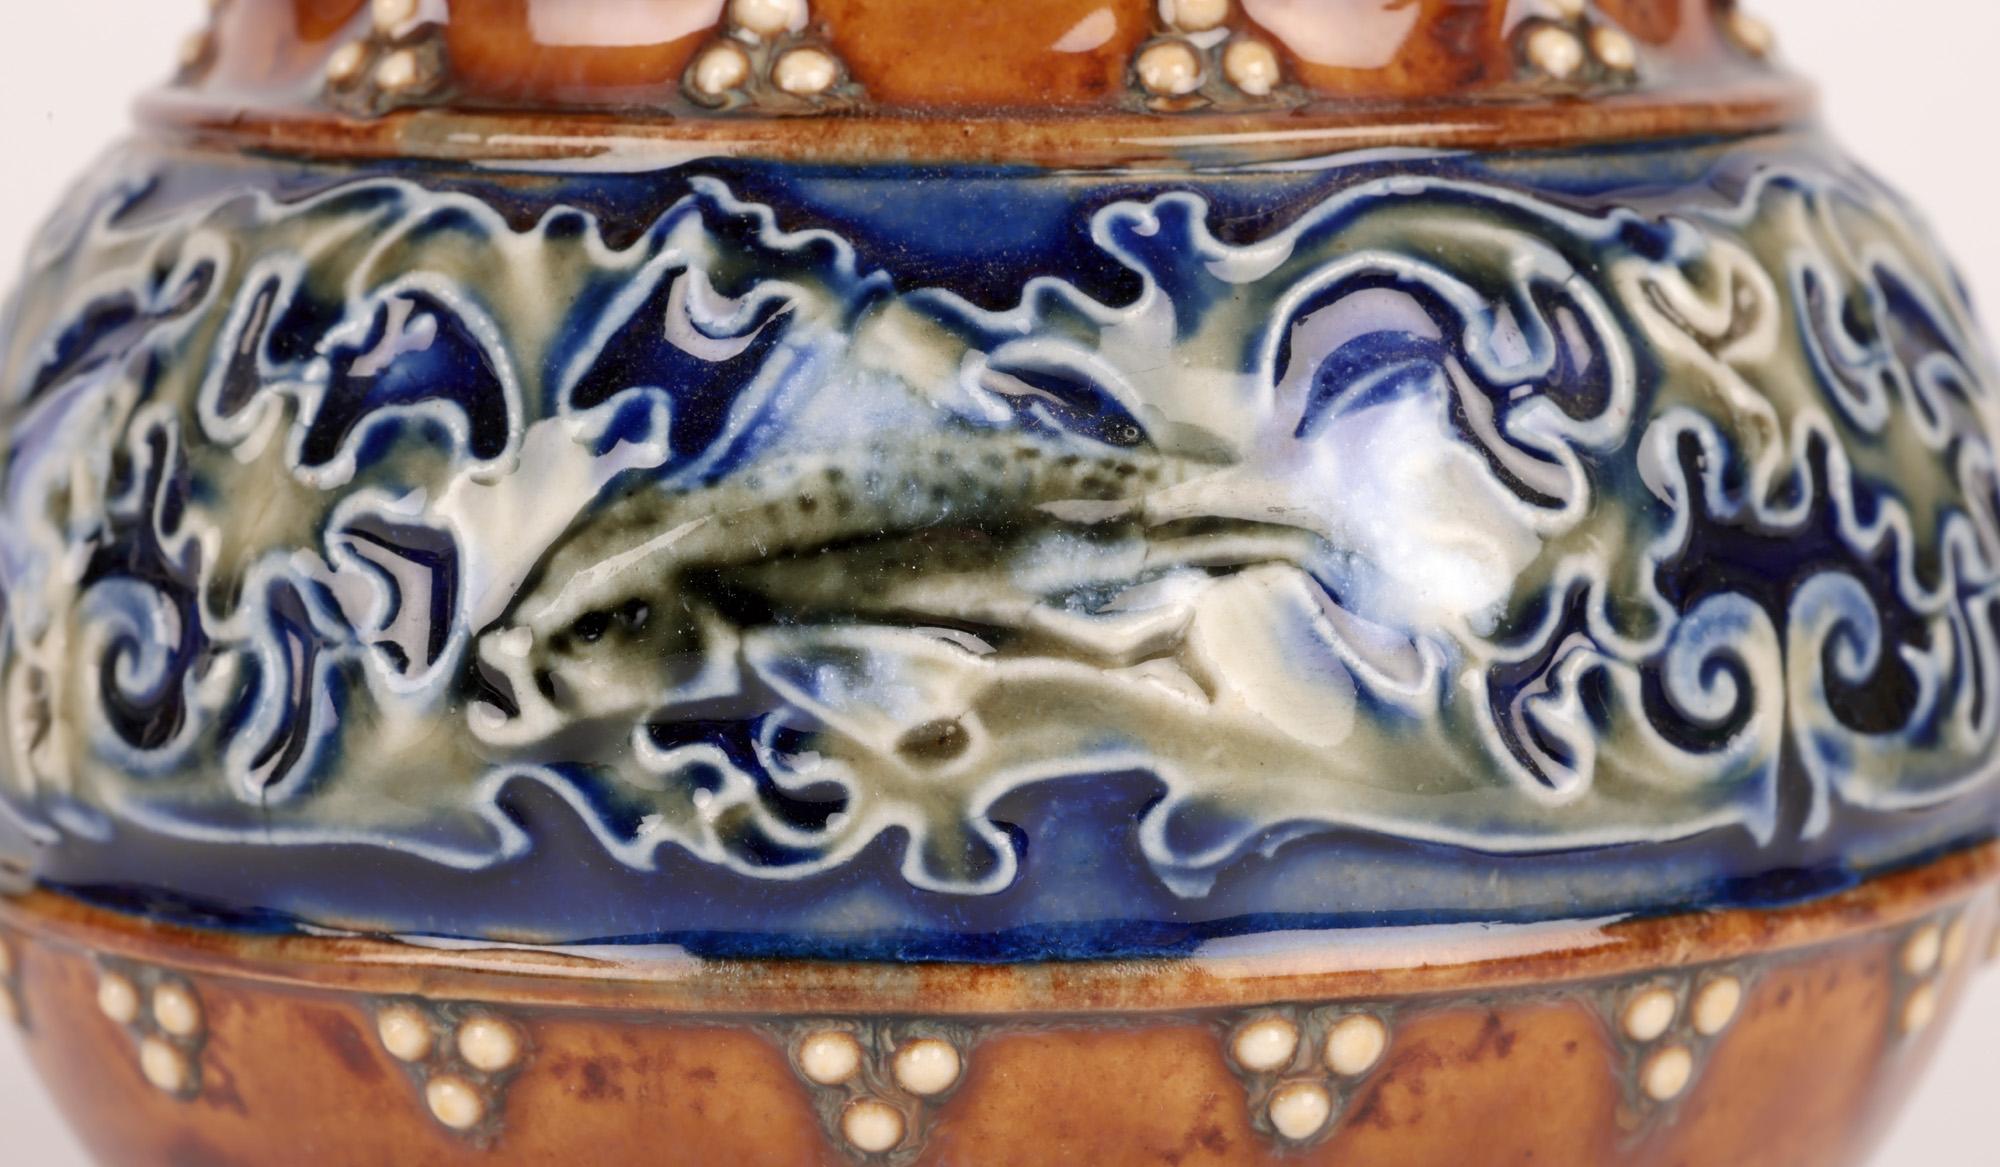 Art Nouveau Doulton Lambeth Art Pottery Vase with Fish by Maud Bowden  For Sale